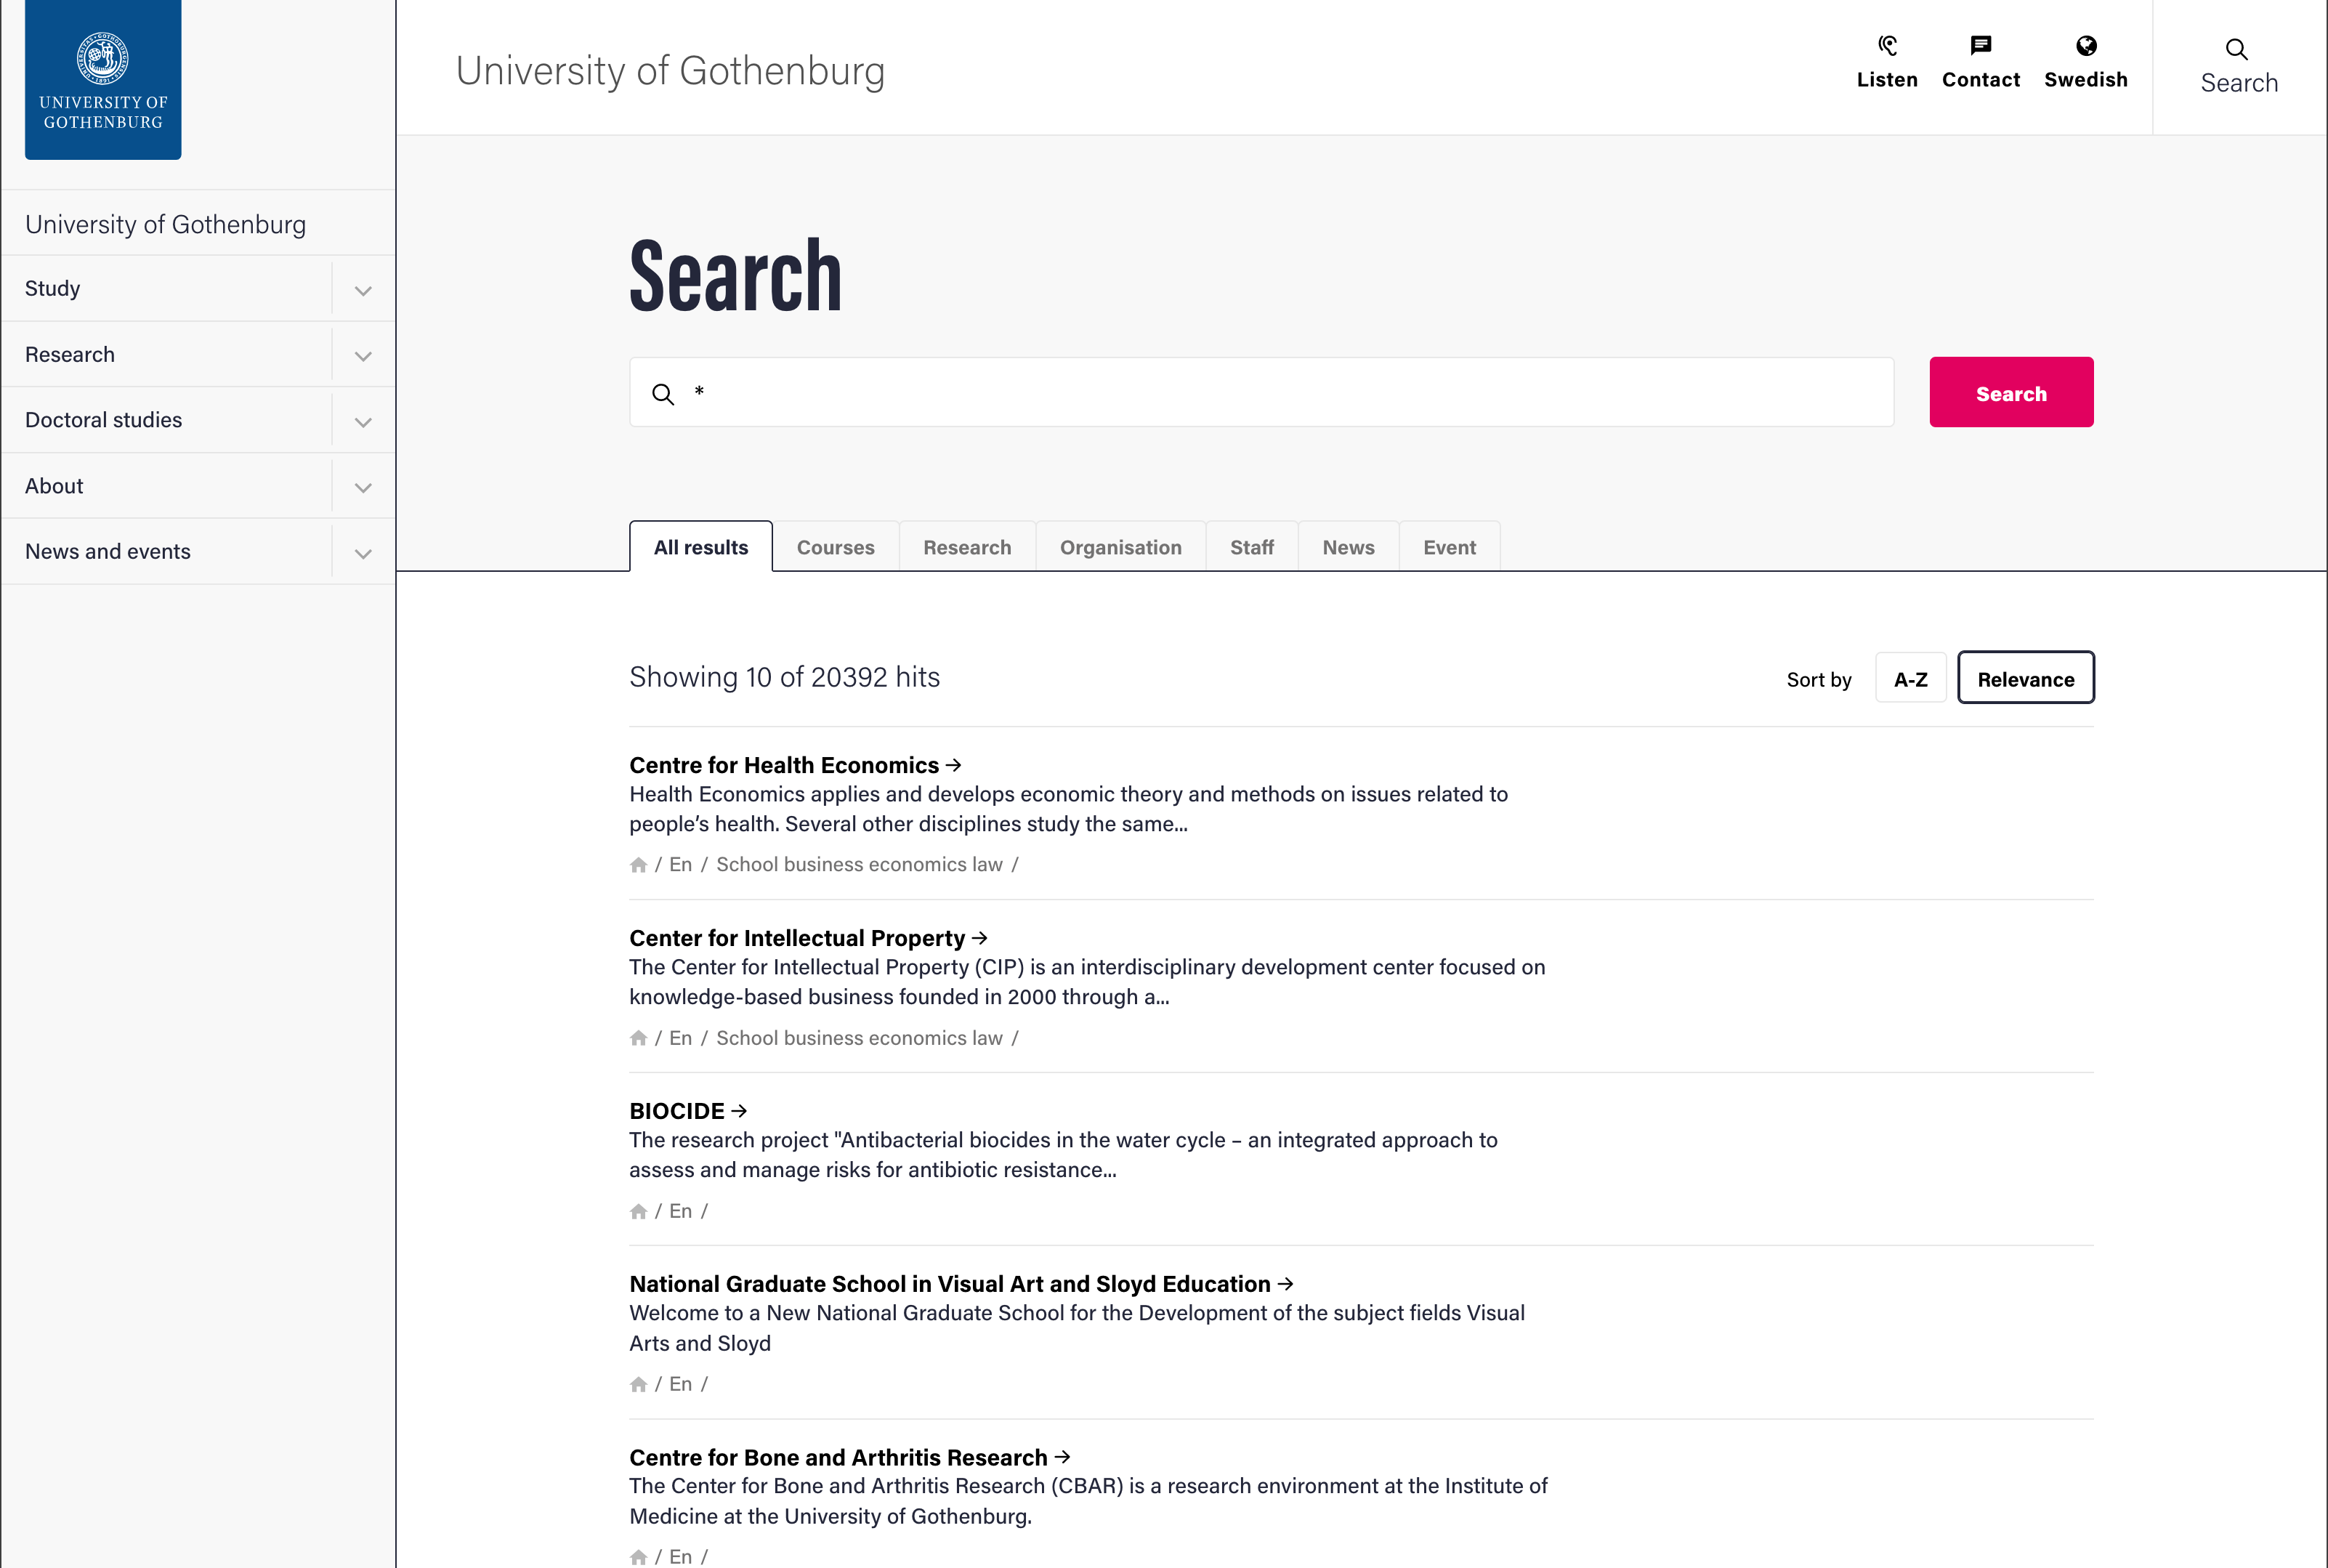 University of Gothenburg's search solution.